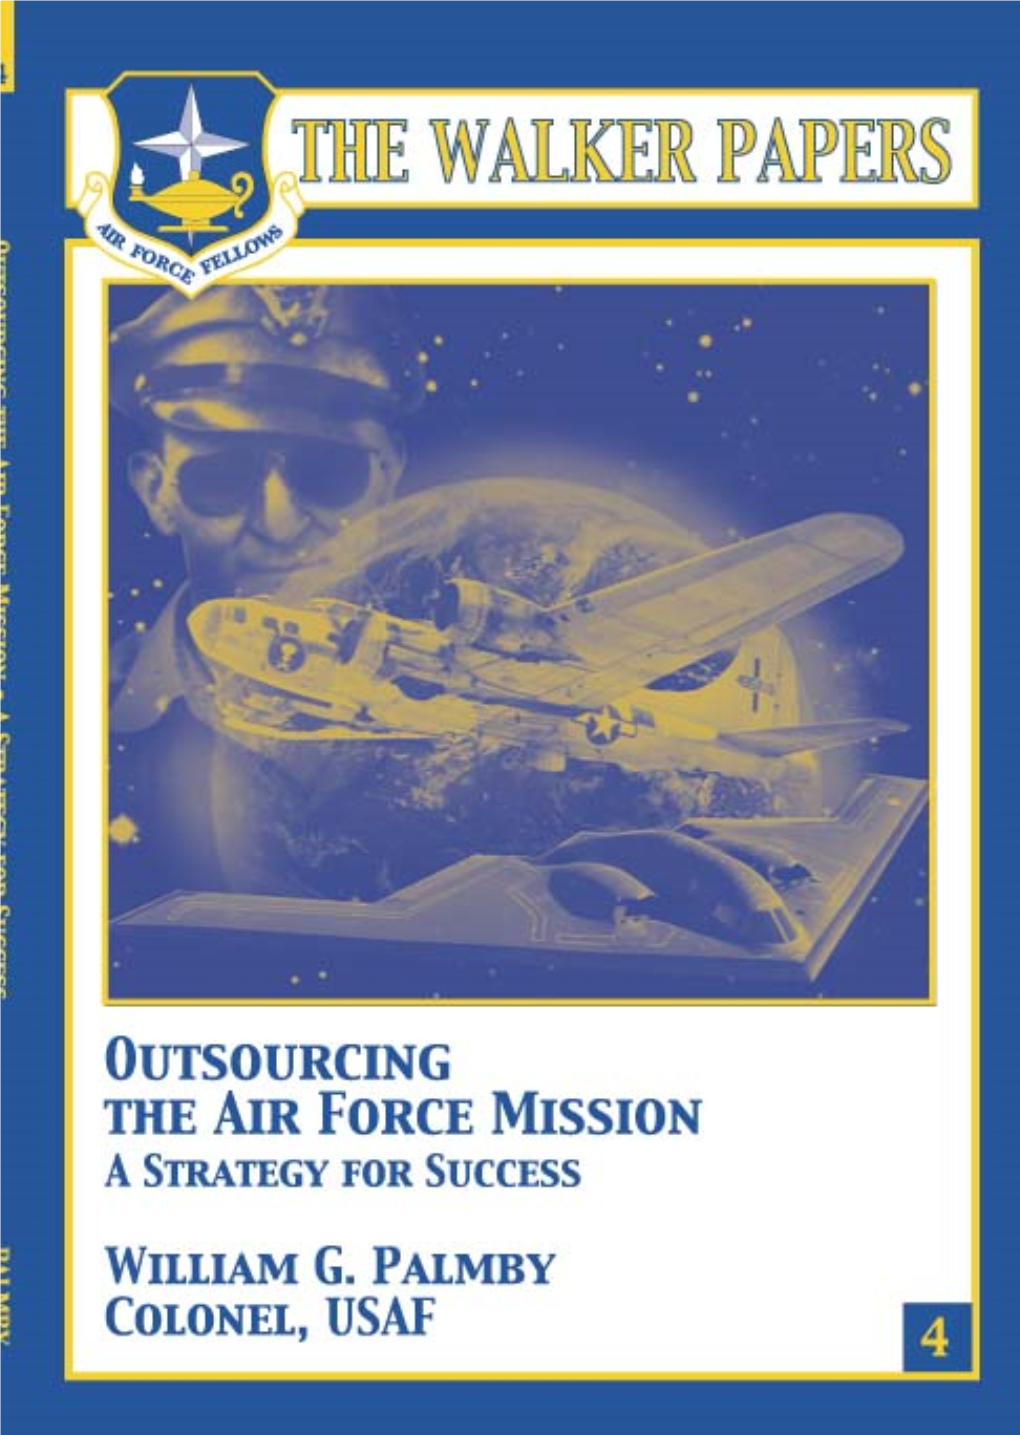 Outsourcing the Air Force Mission